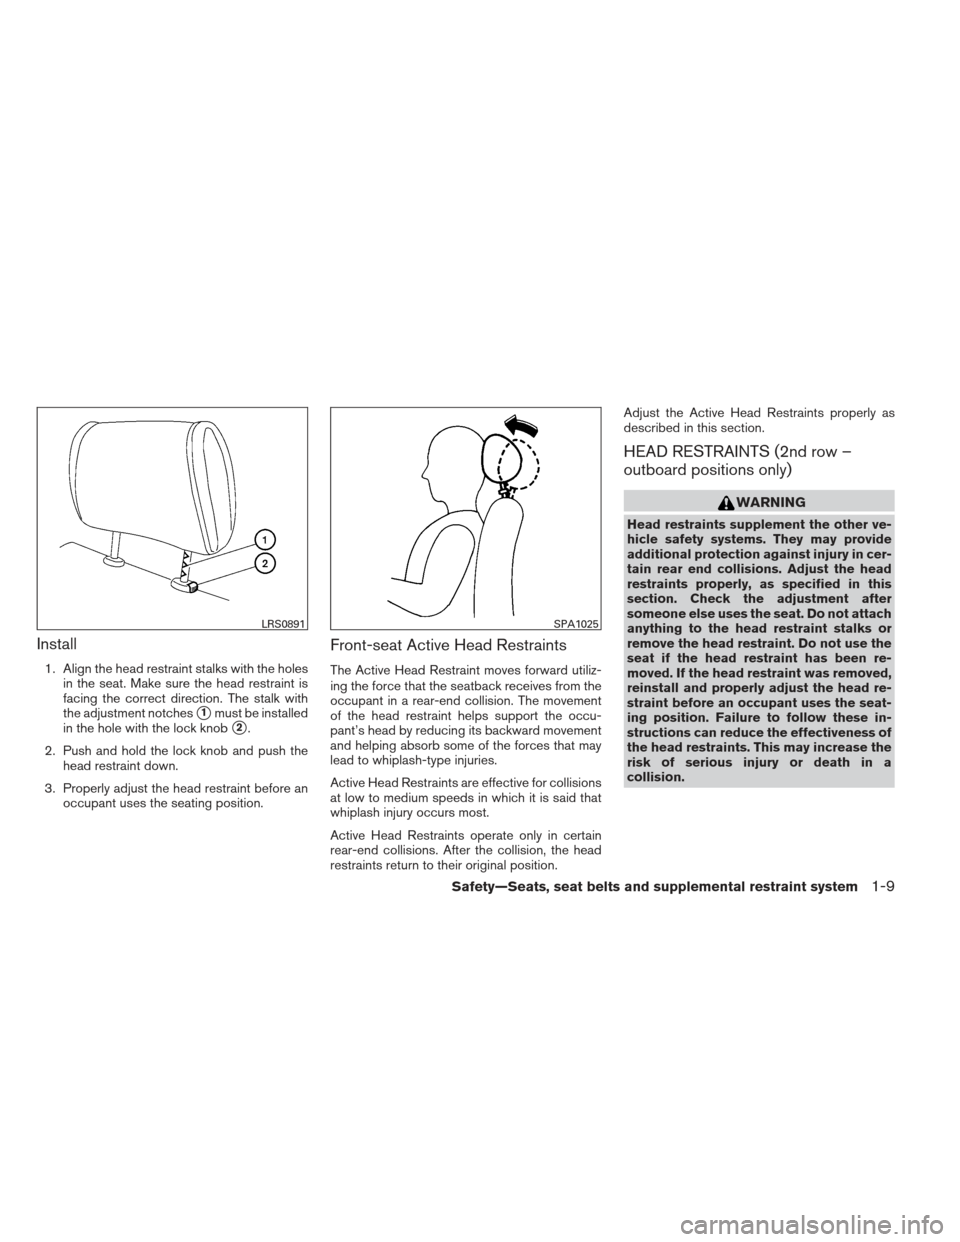 NISSAN FRONTIER 2013 D40 / 2.G Owners Manual Install
1. Align the head restraint stalks with the holesin the seat. Make sure the head restraint is
facing the correct direction. The stalk with
the adjustment notches
1must be installed
in the hol